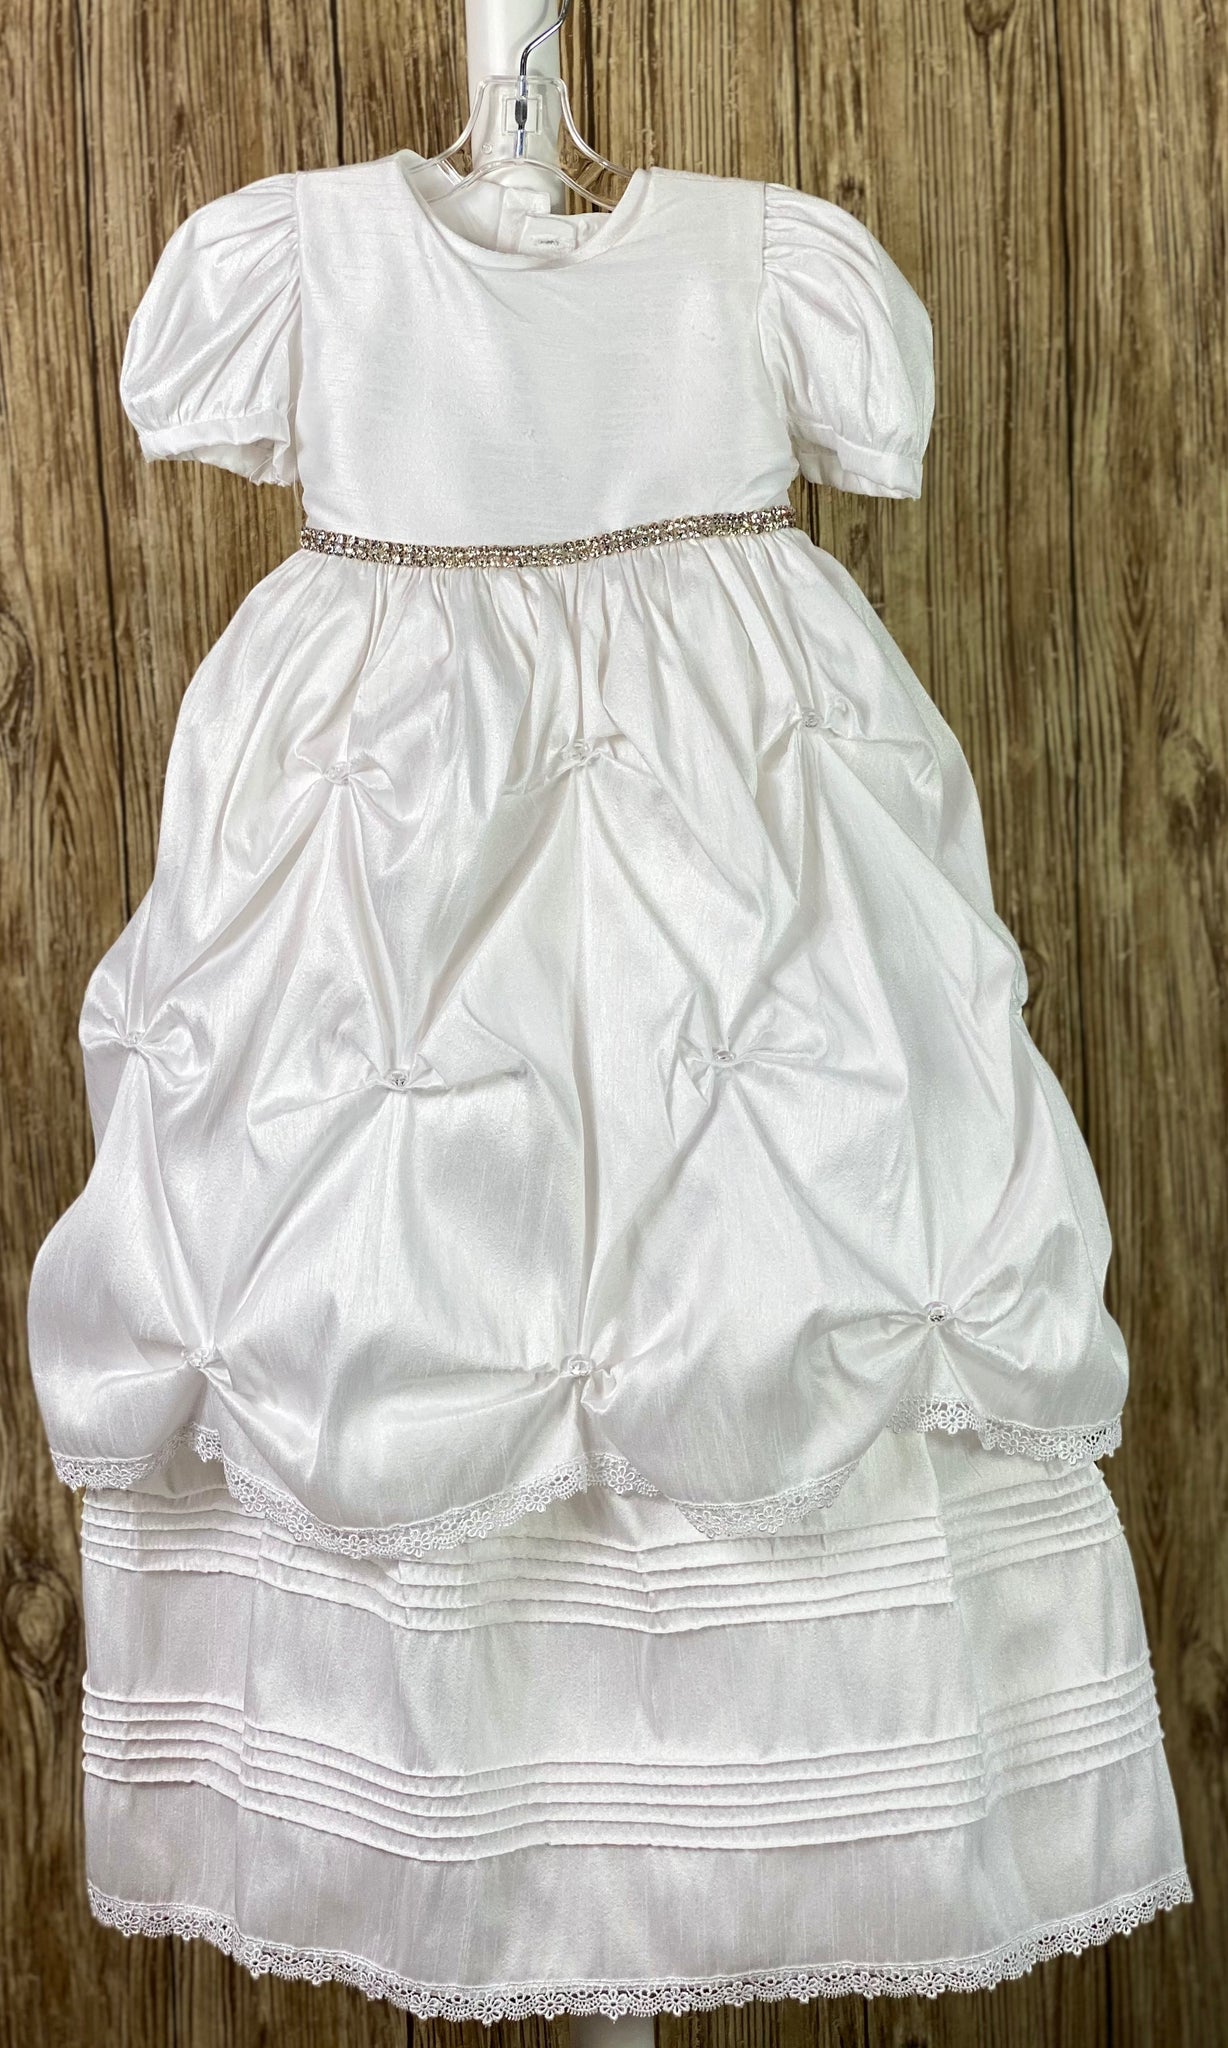 This a beautiful, one-of-a-kind baptism gown.  A lovely gown for a precious child.  White, size 24M Two layer dress Satin bodice  Rhinestone belting Puffed satin sleeves Gathered ruffled skirting with rhinestones Second layer has horizonal pinstripes with lace trim  Satin bow in back